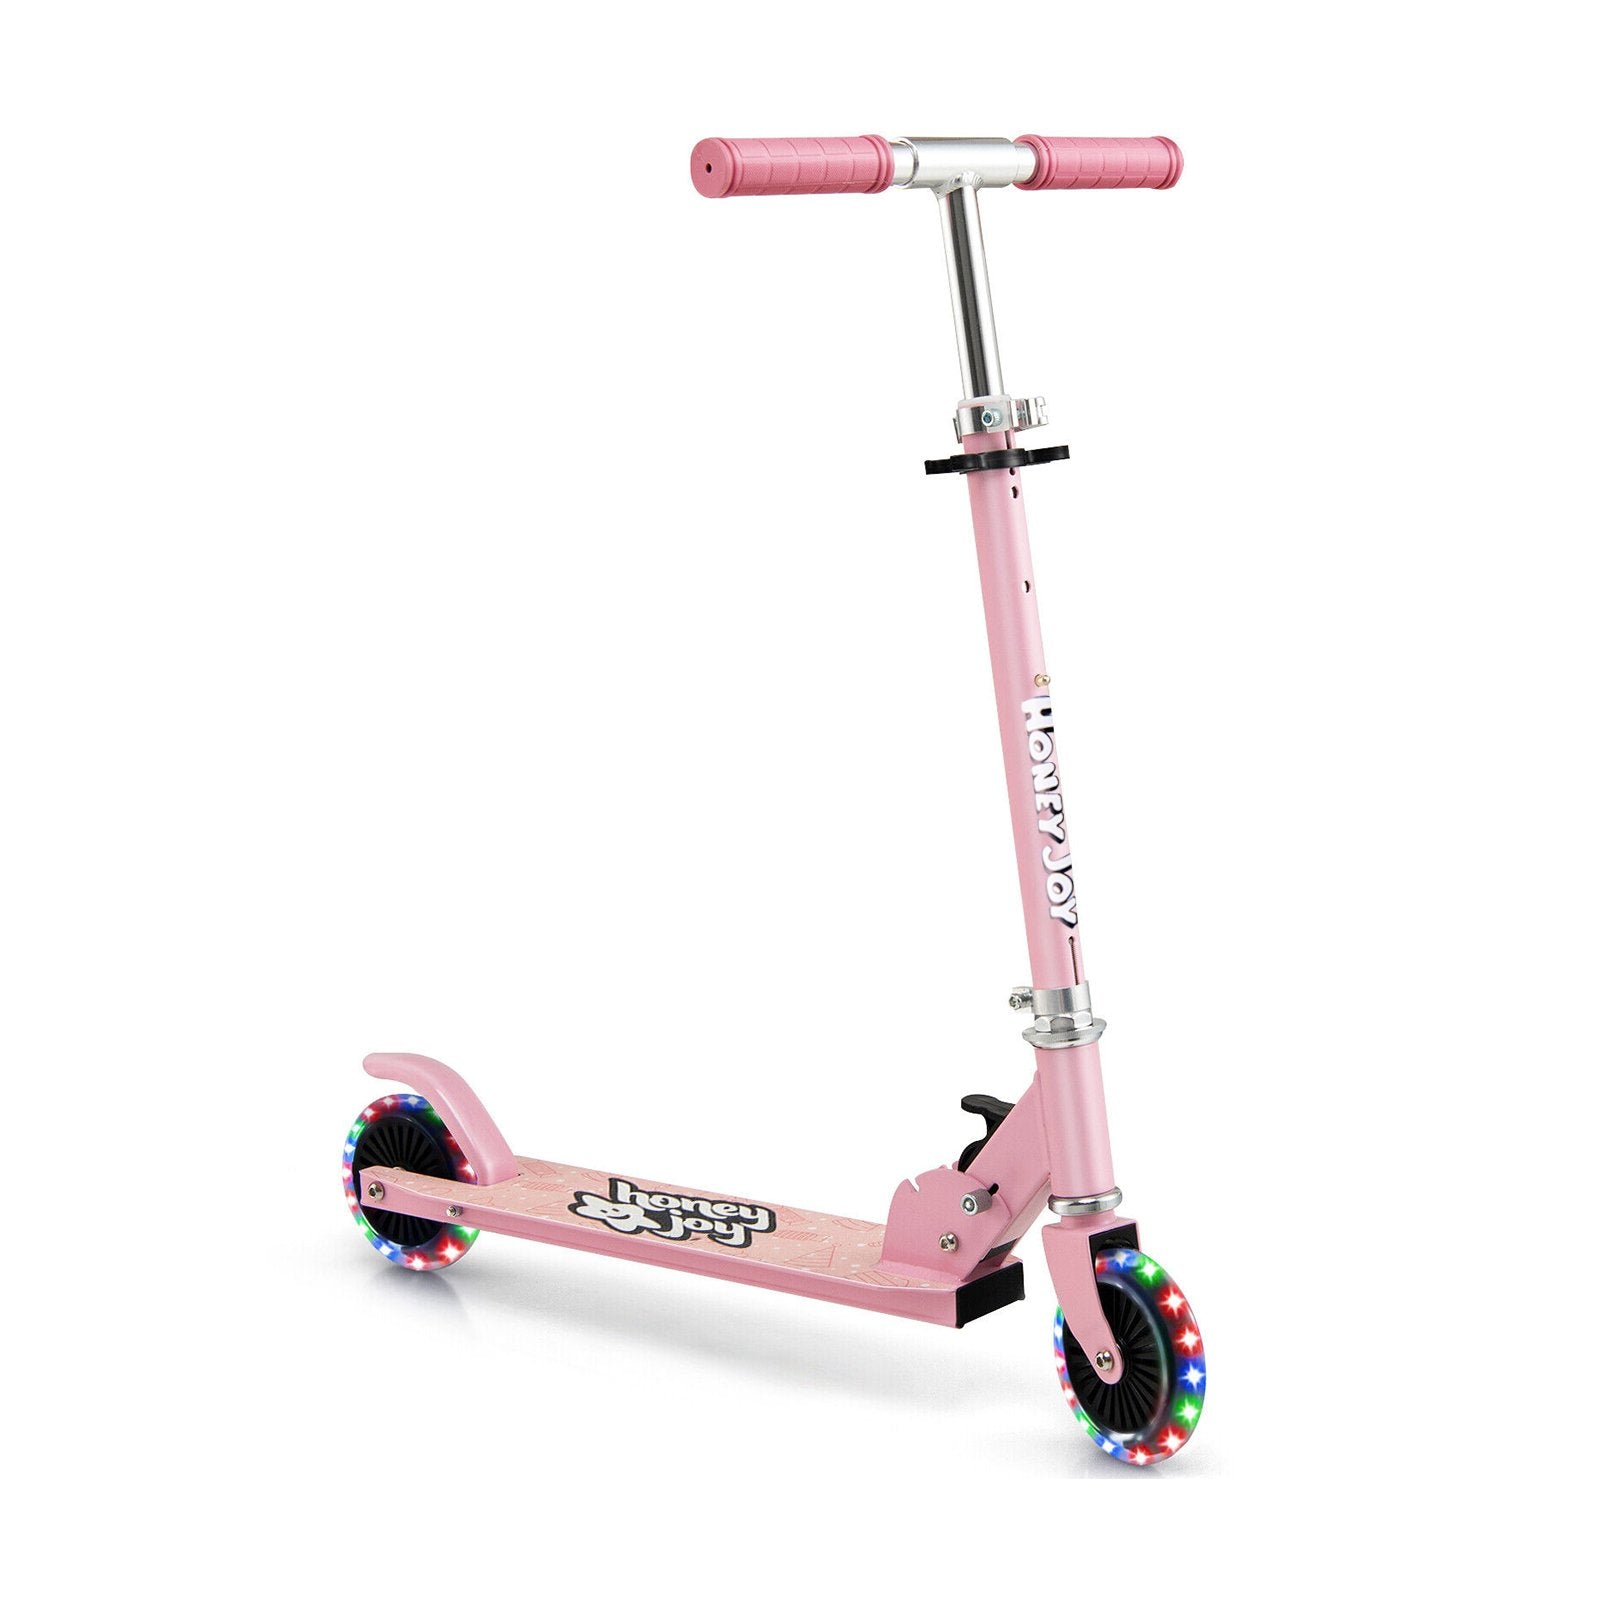 Folding Adjustable Height Kids Toy Kick Scooter with 2 Flashing Wheels, Pink at Gallery Canada